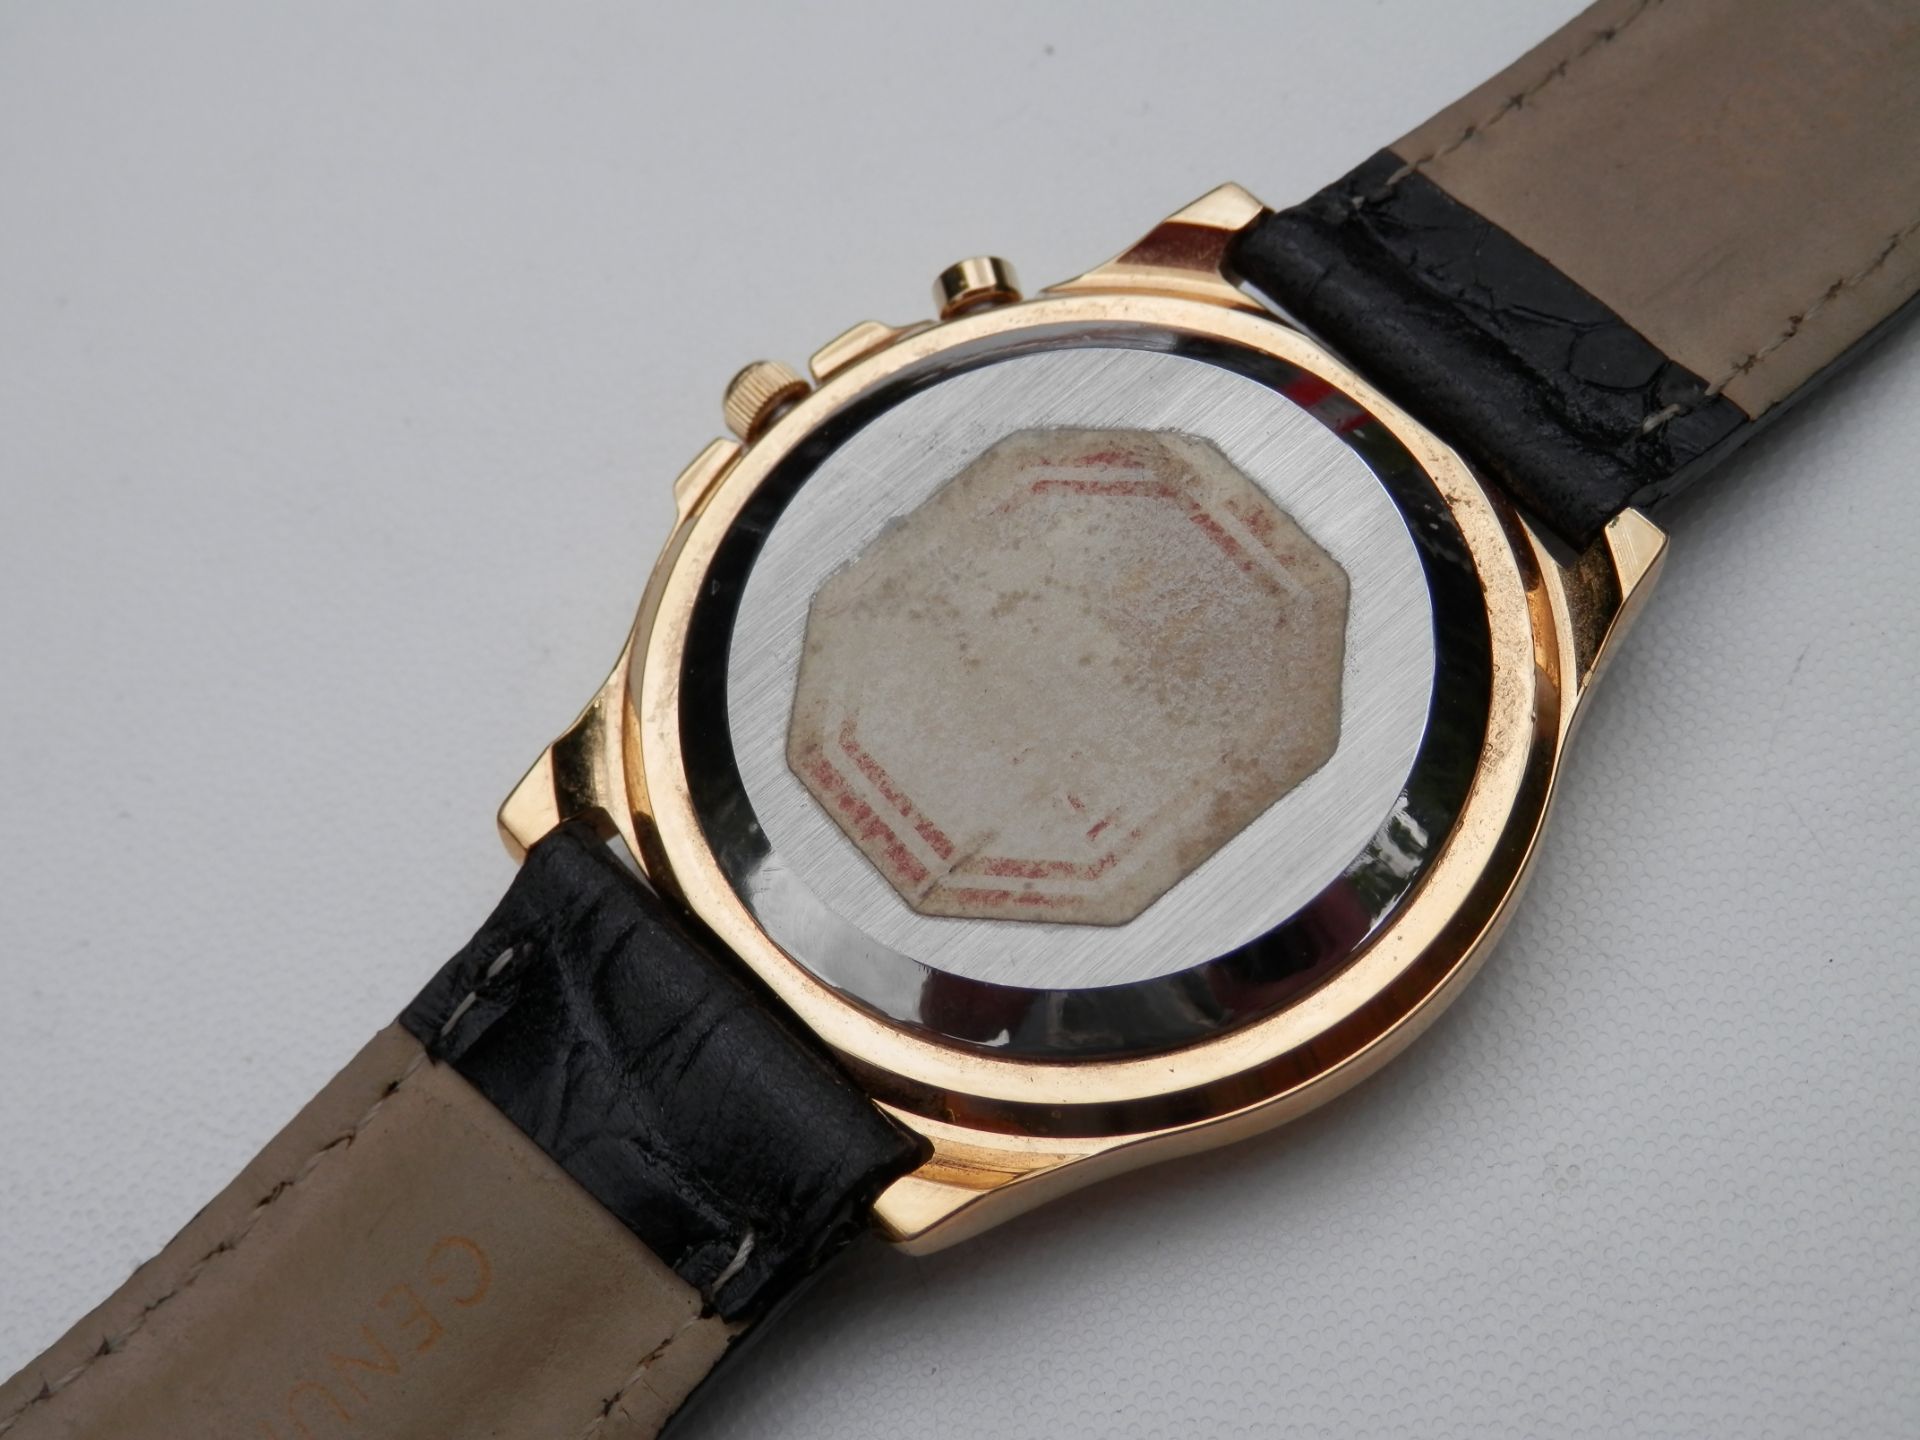 FULLY WORKING 1990S ACCURIST GENTS GOLD PLATED ANALOGUE ALARM QUARTZ WATCH, METALLIC BLUE DIAL. - Image 7 of 8